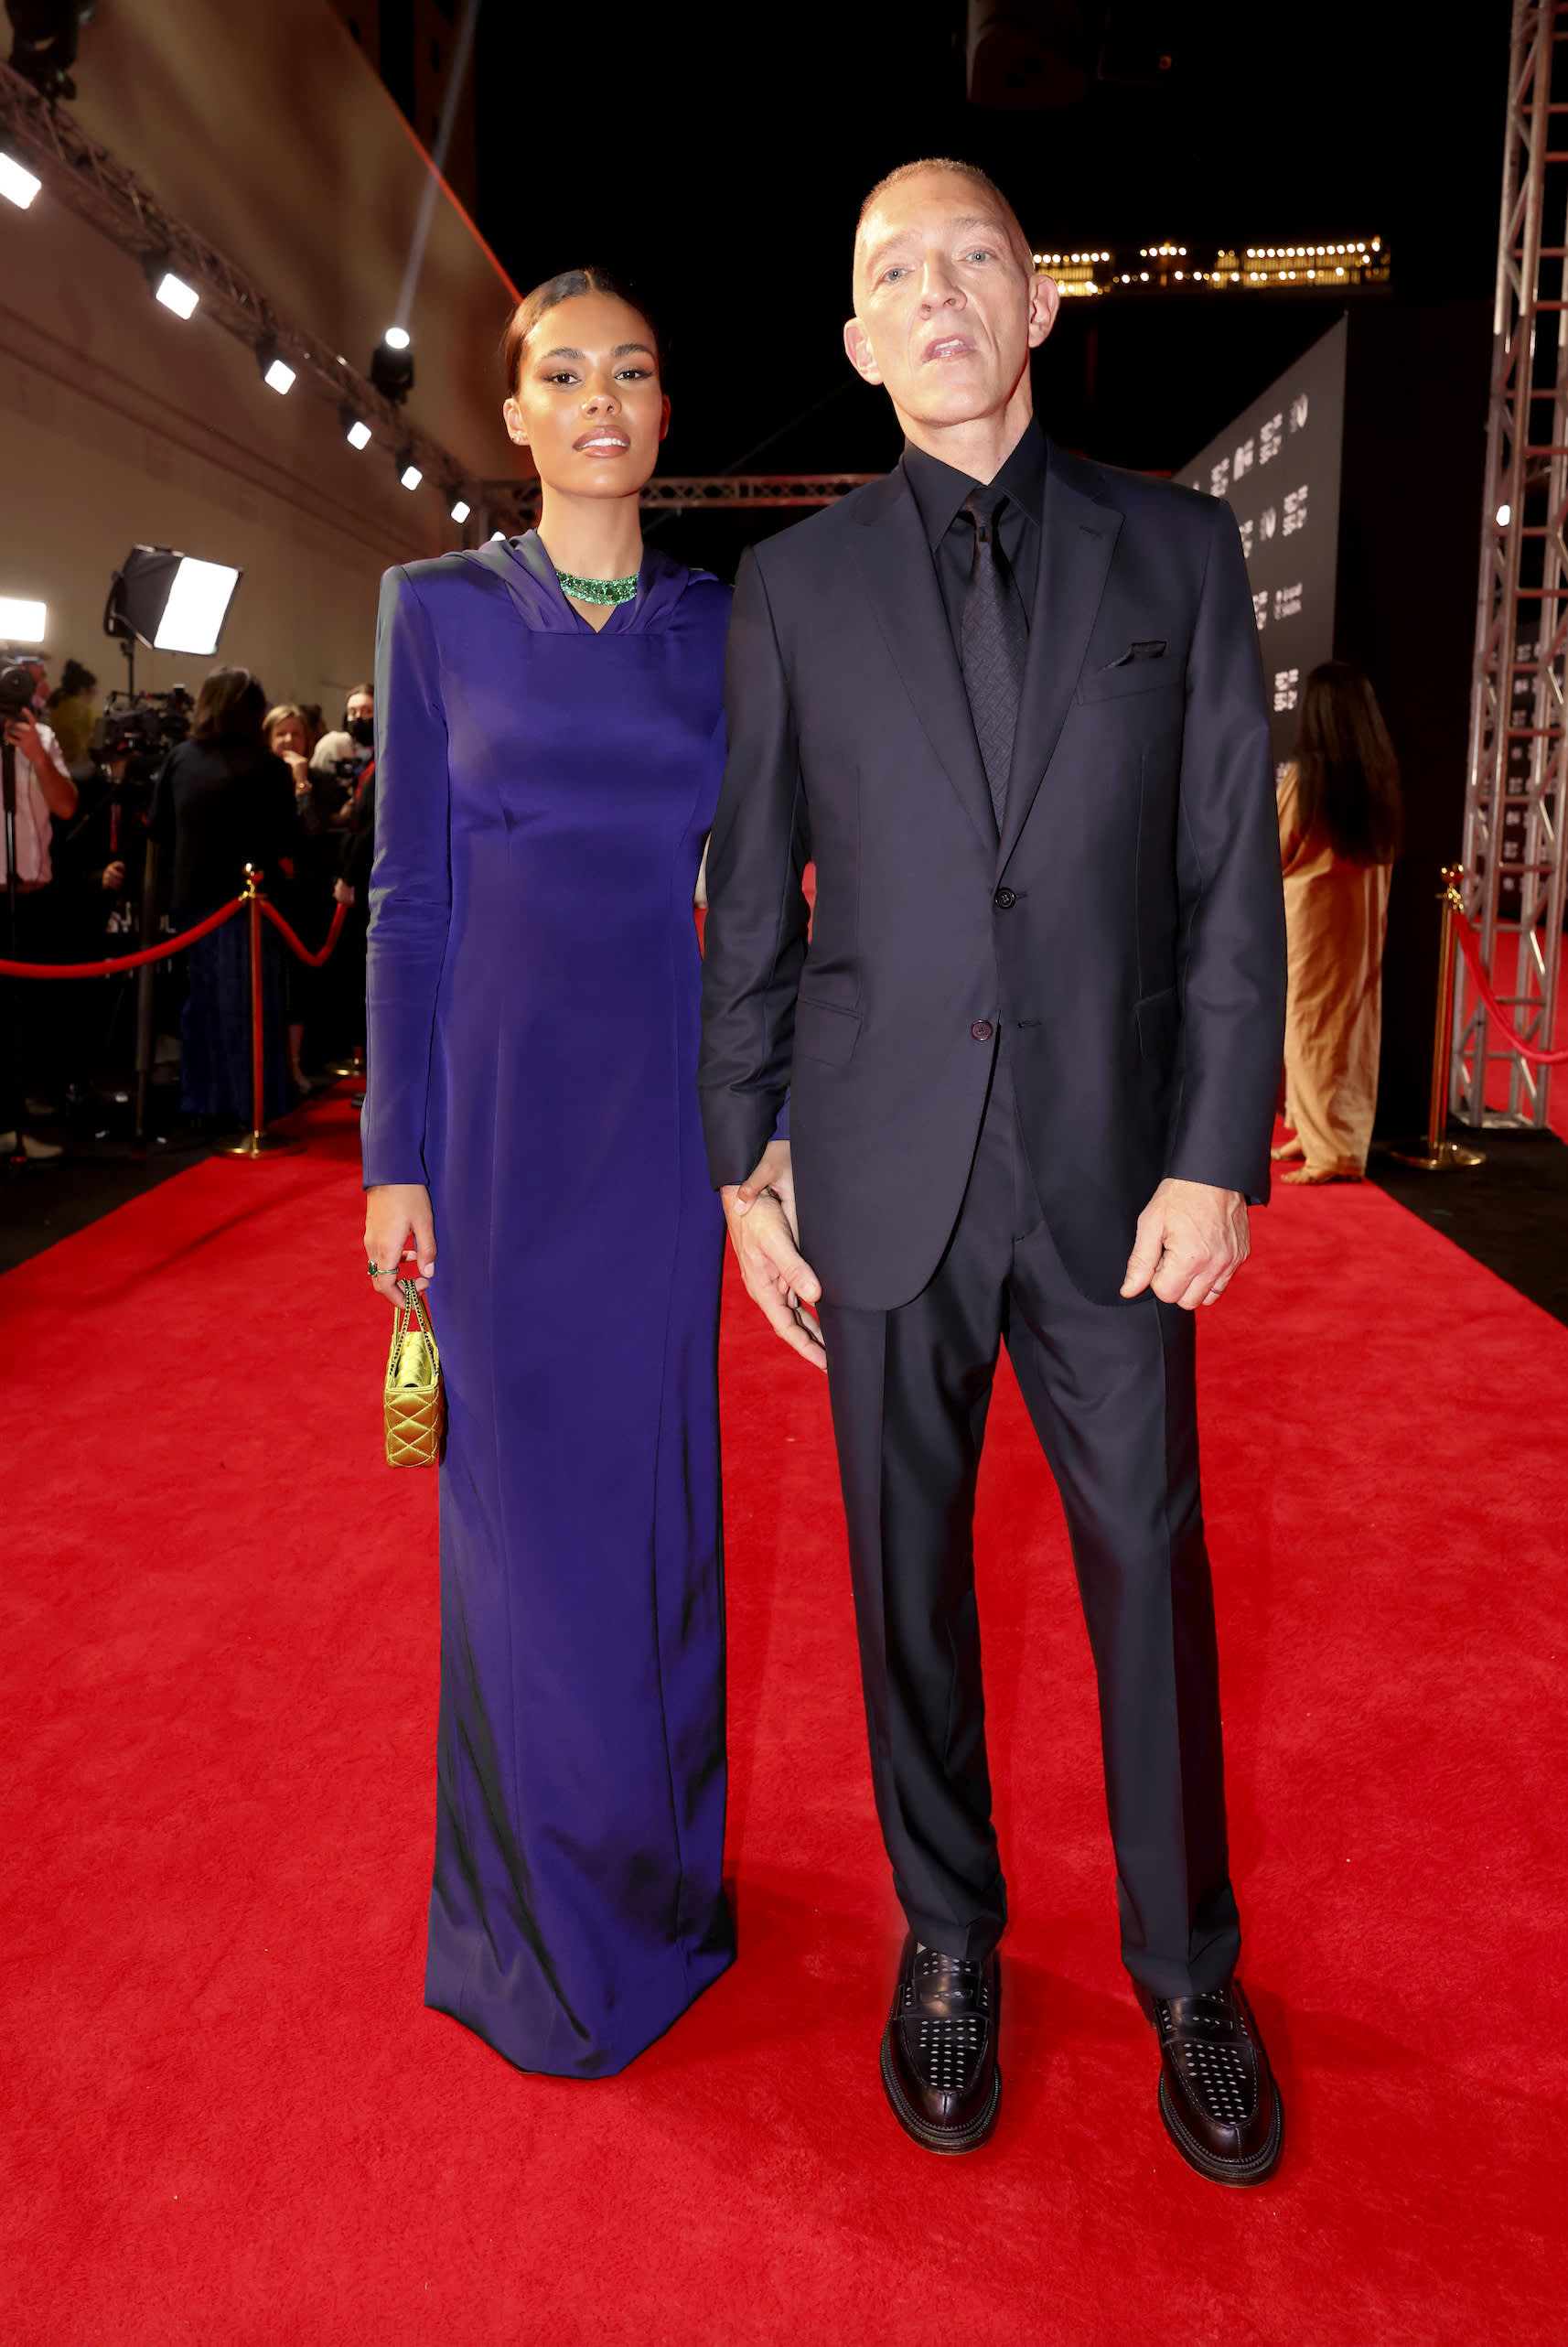 Vincent Cassel, pictured with Tina Kunakey, wearing a Brioni blue suit